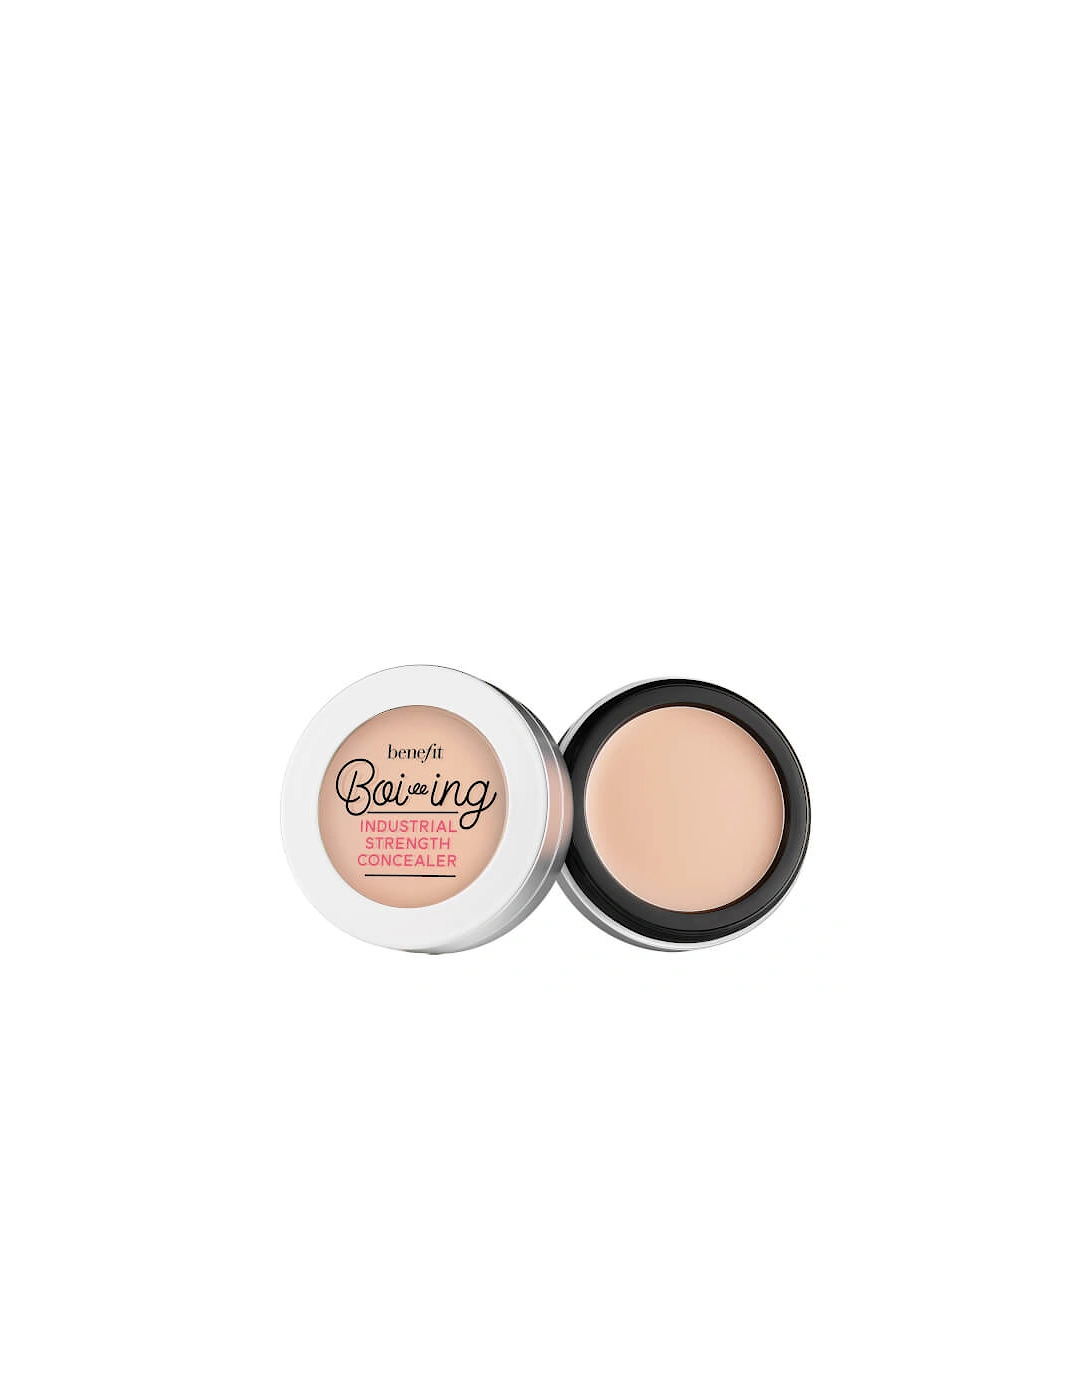 Boi-ing Industrial Strength Concealer Shade 01, 7 of 6